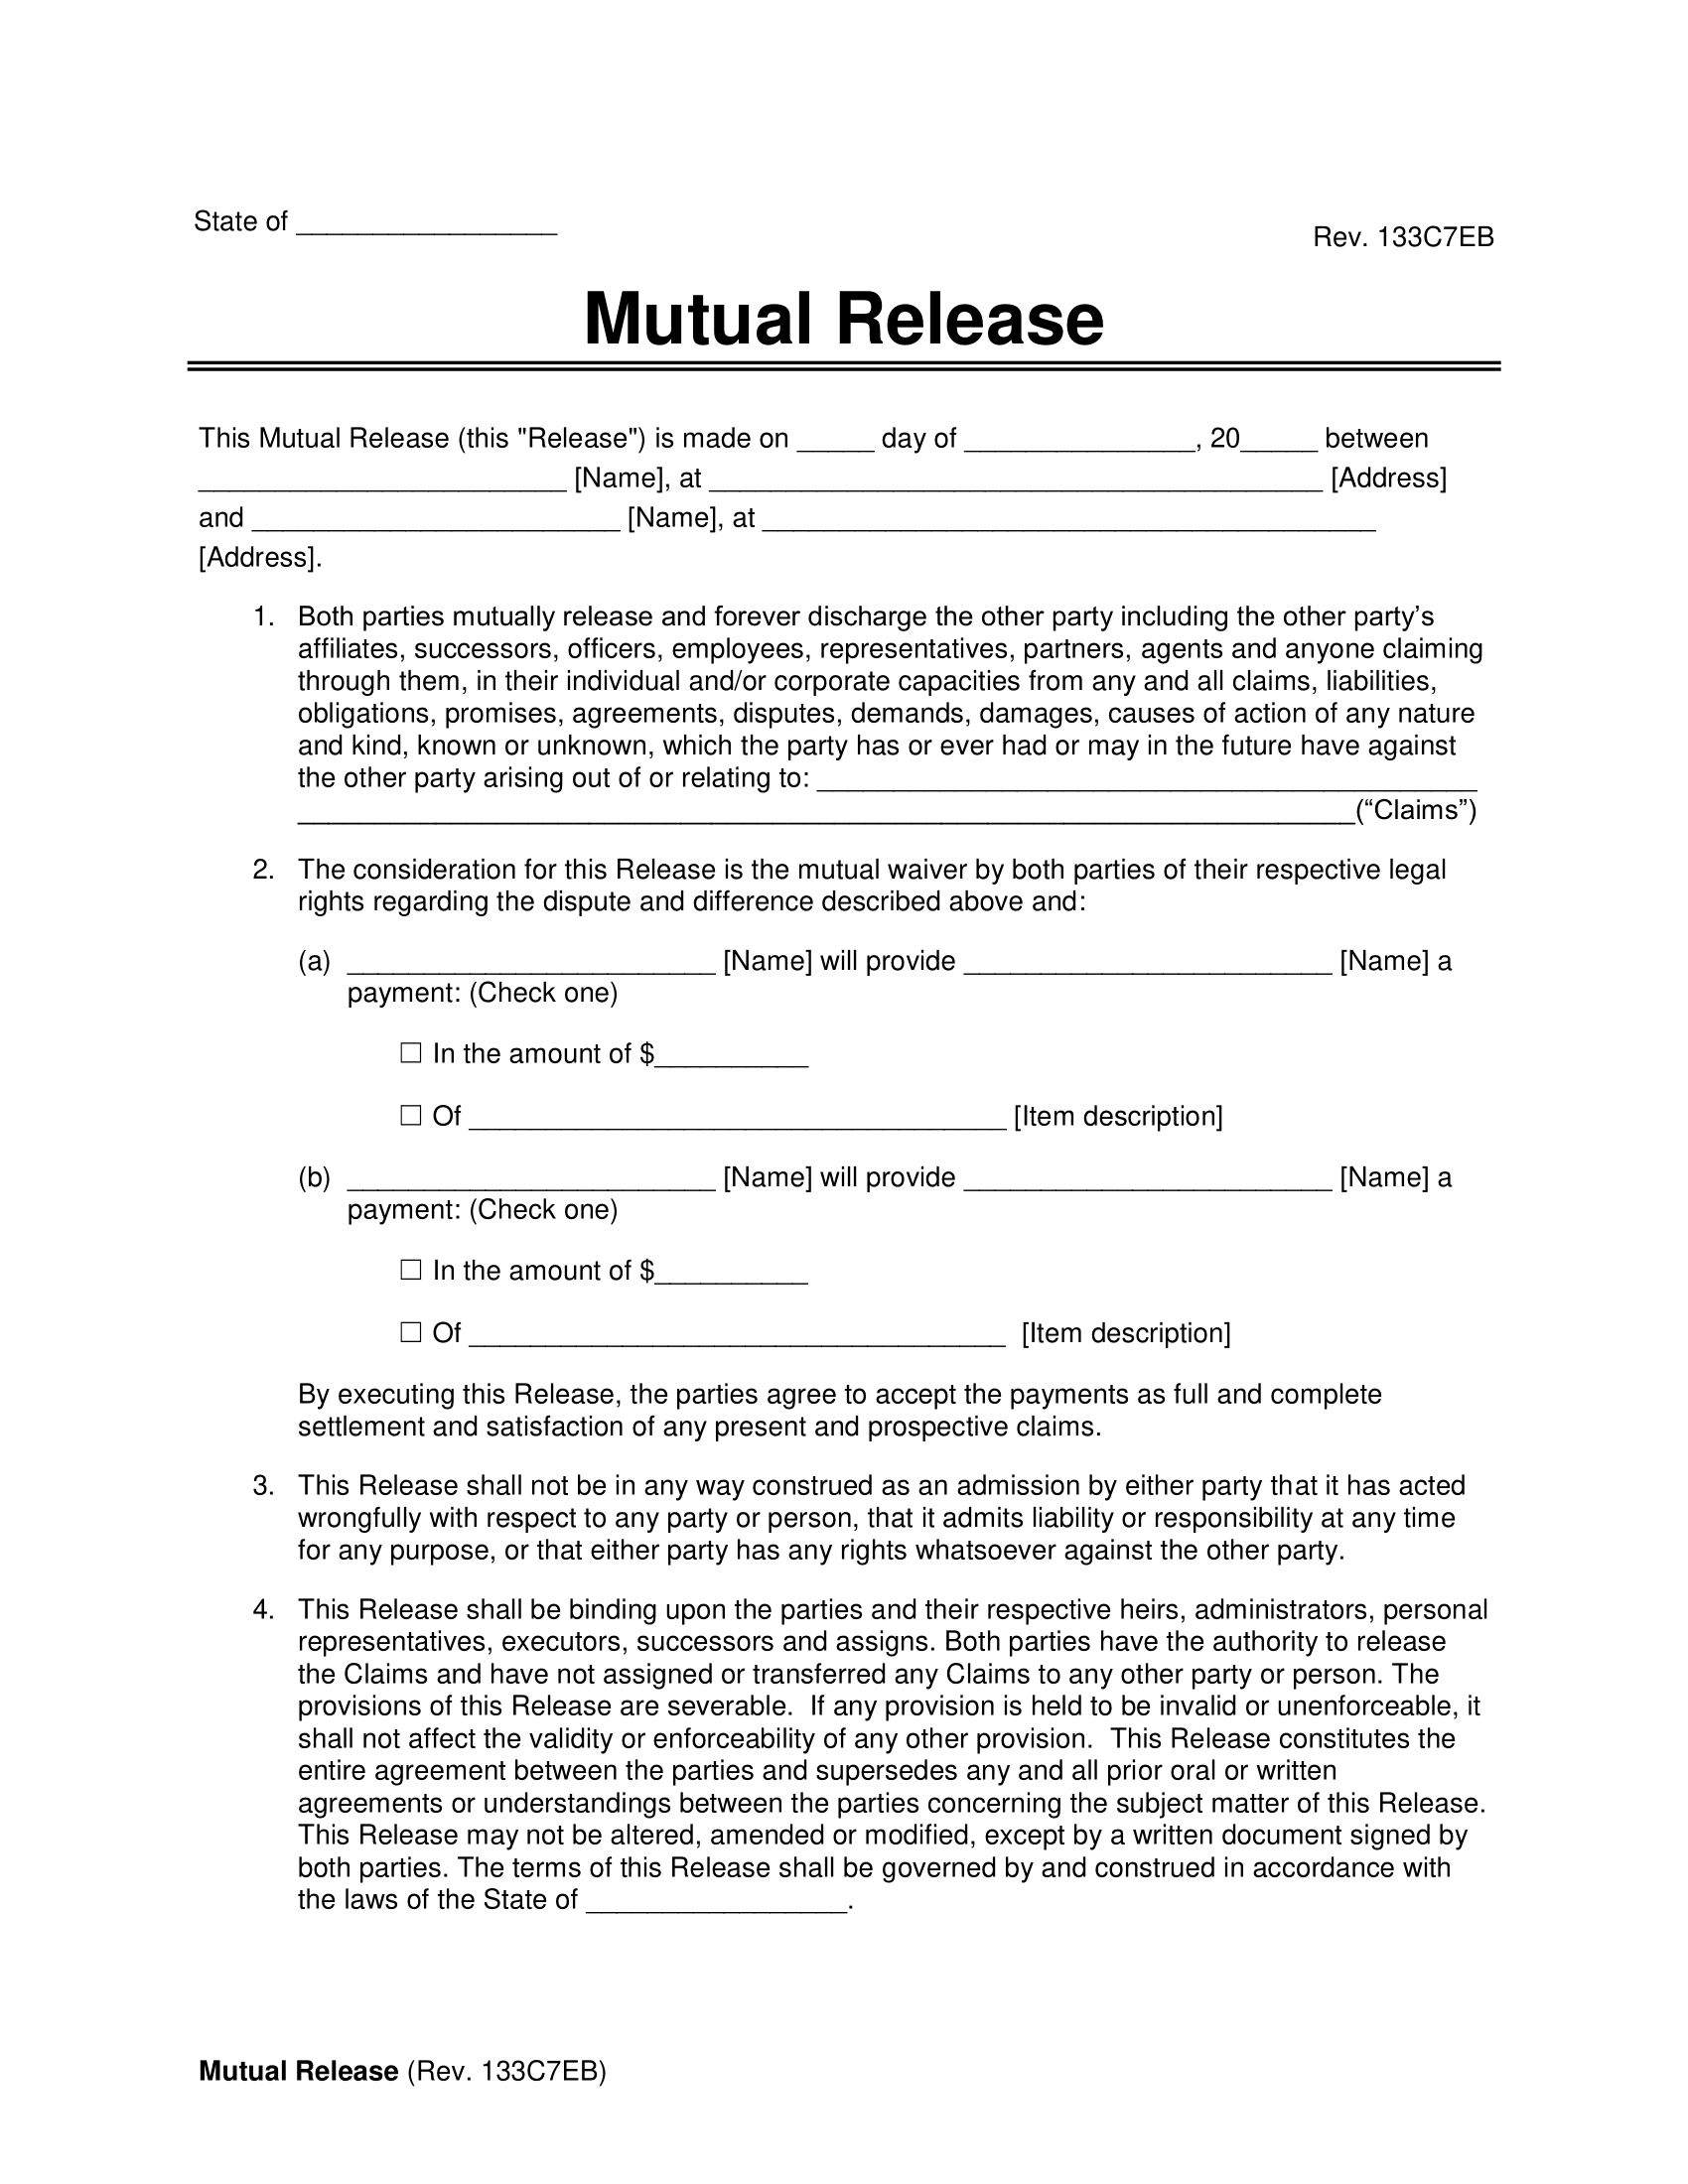 Mutual Release of Liability (Waiver) Agreement Form 